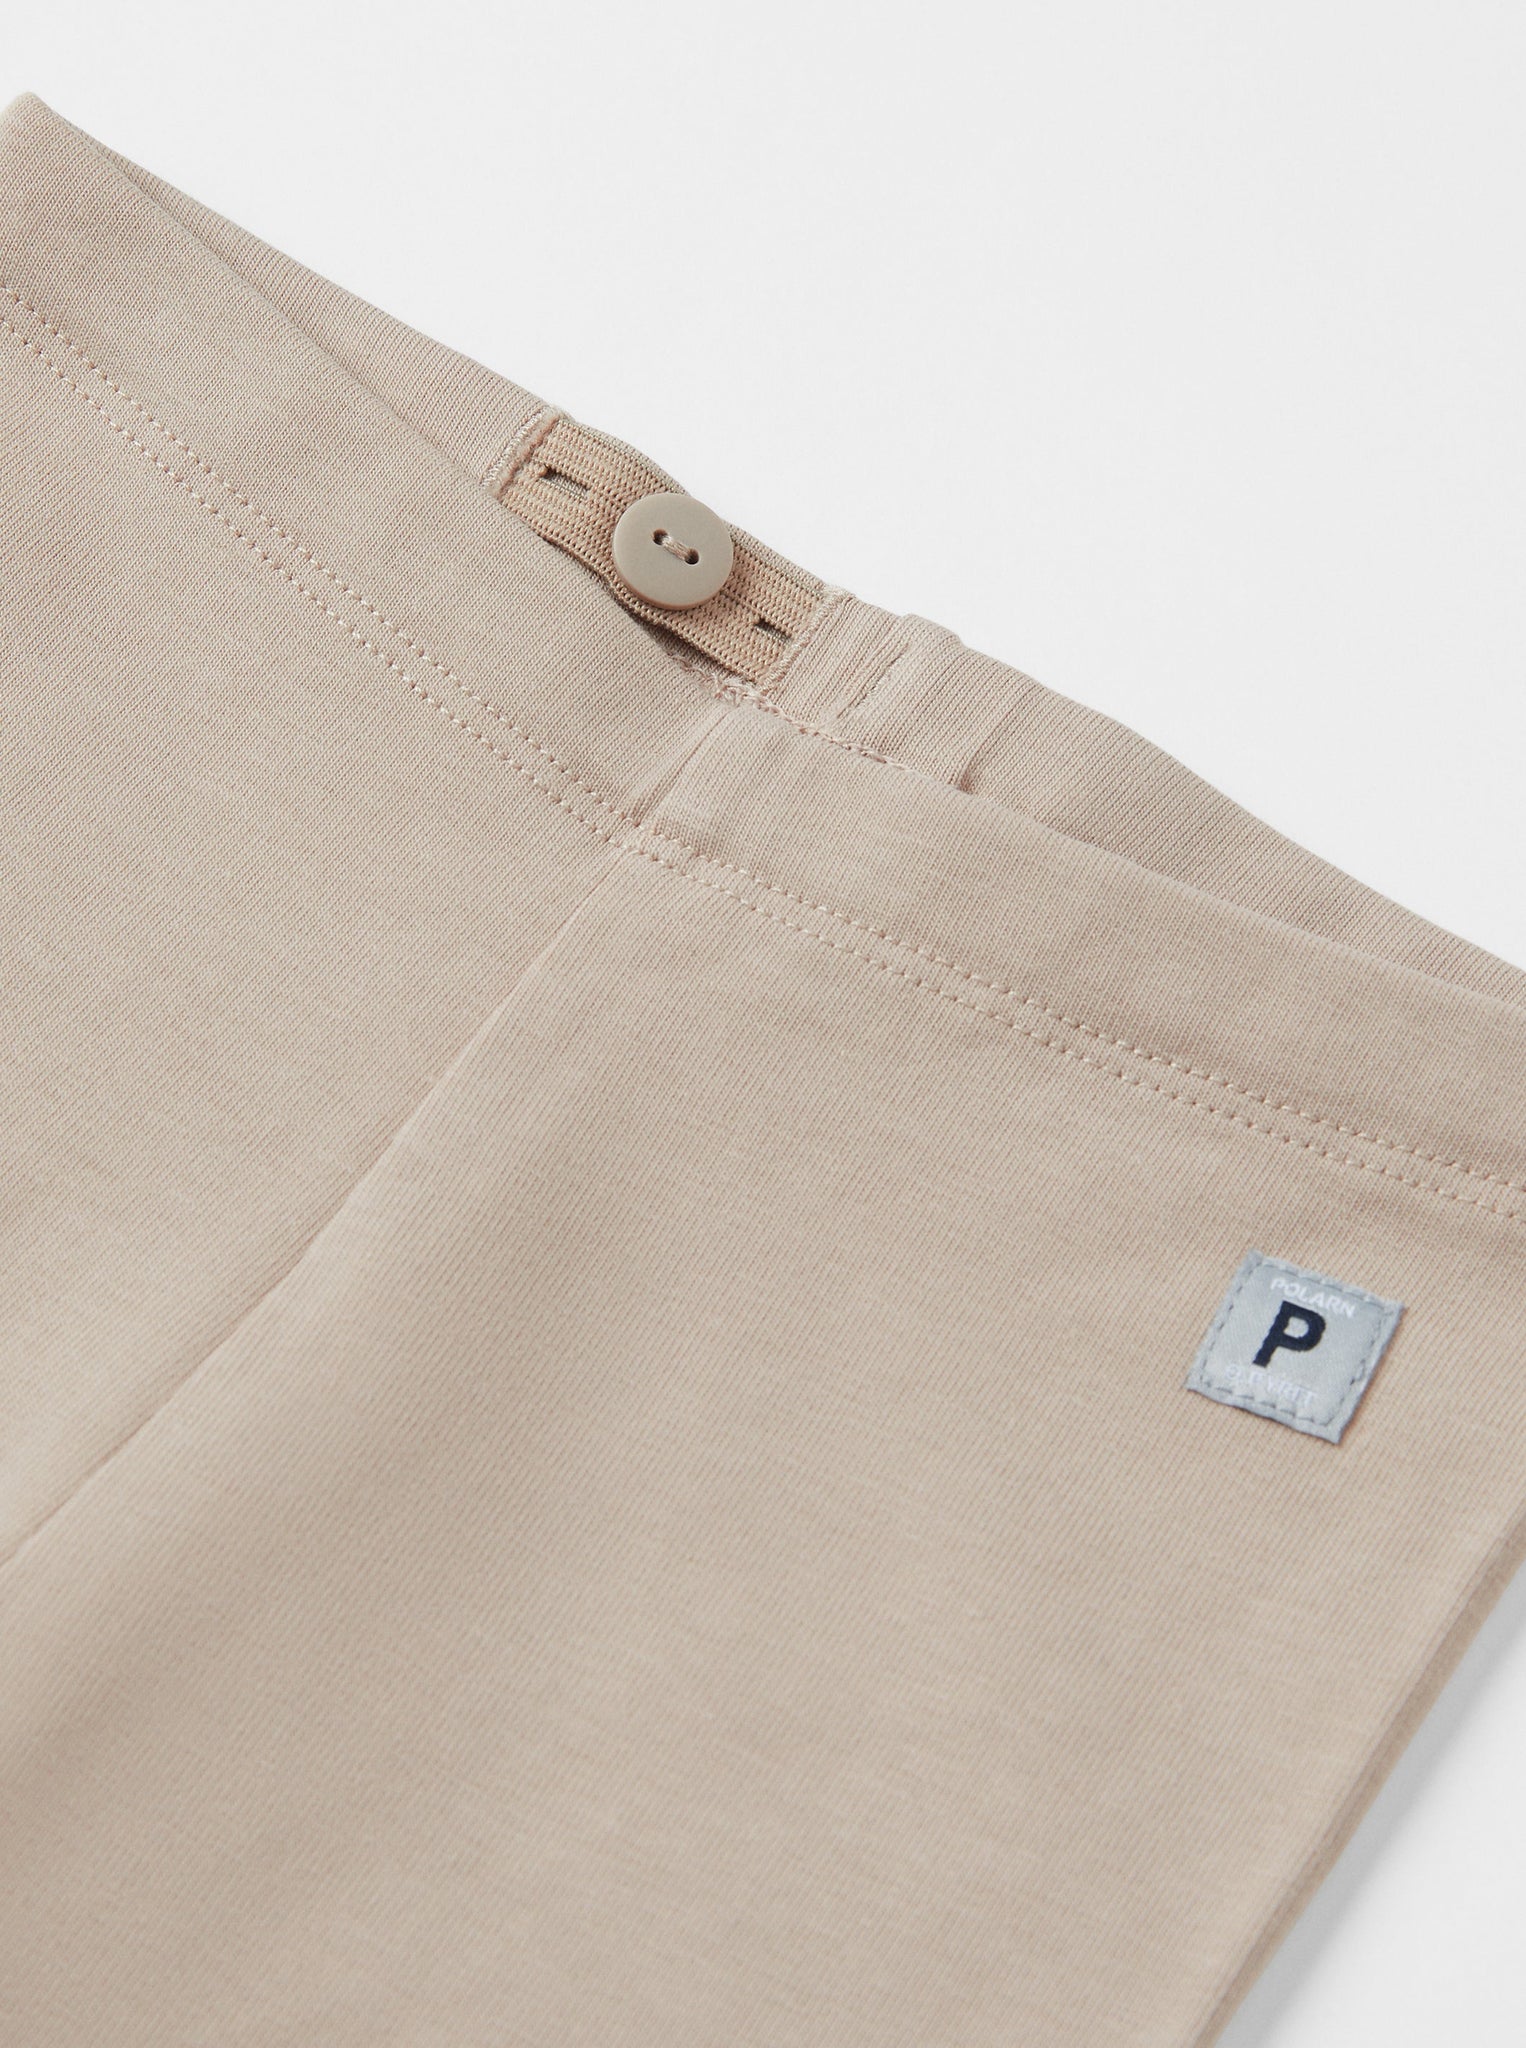 Organic Cotton Beige Baby Leggings from the Polarn O. Pyret babywear collection. Clothes made using sustainably sourced materials.